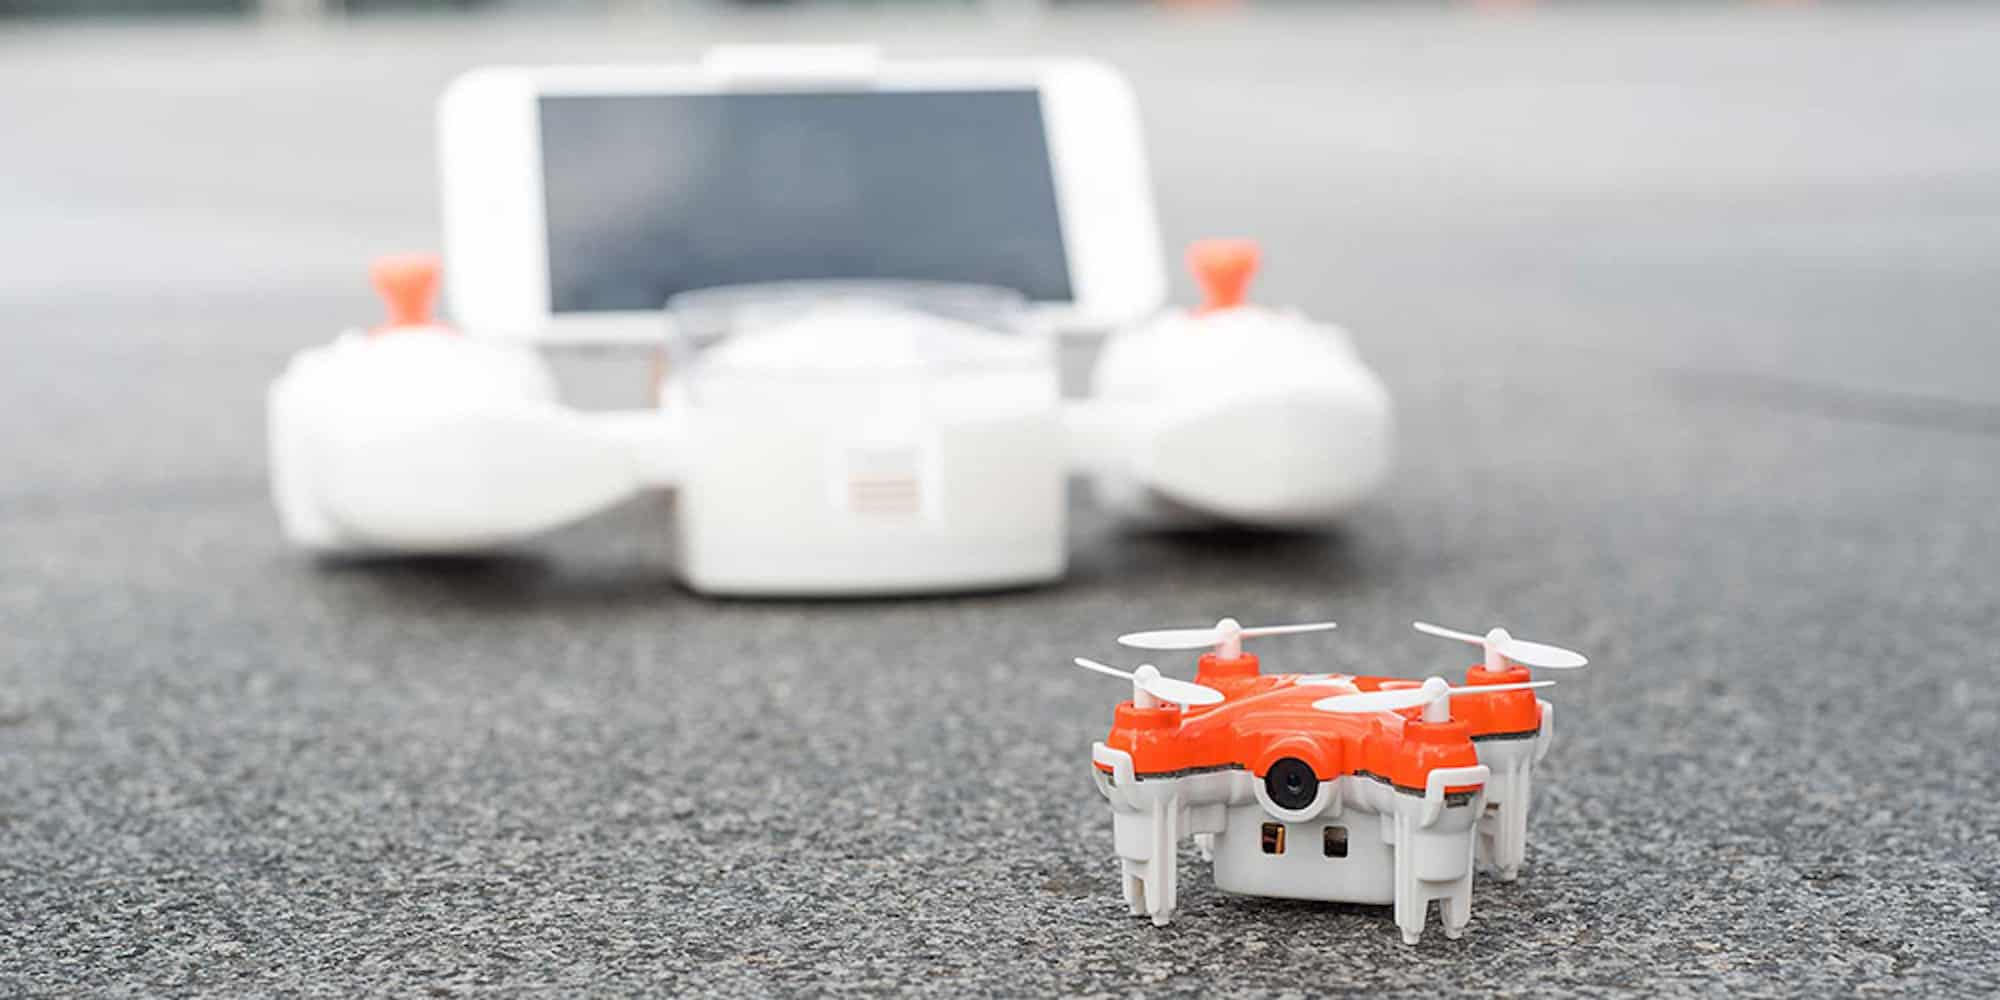 This might be the smallest drone out there, but it's still big on fun.